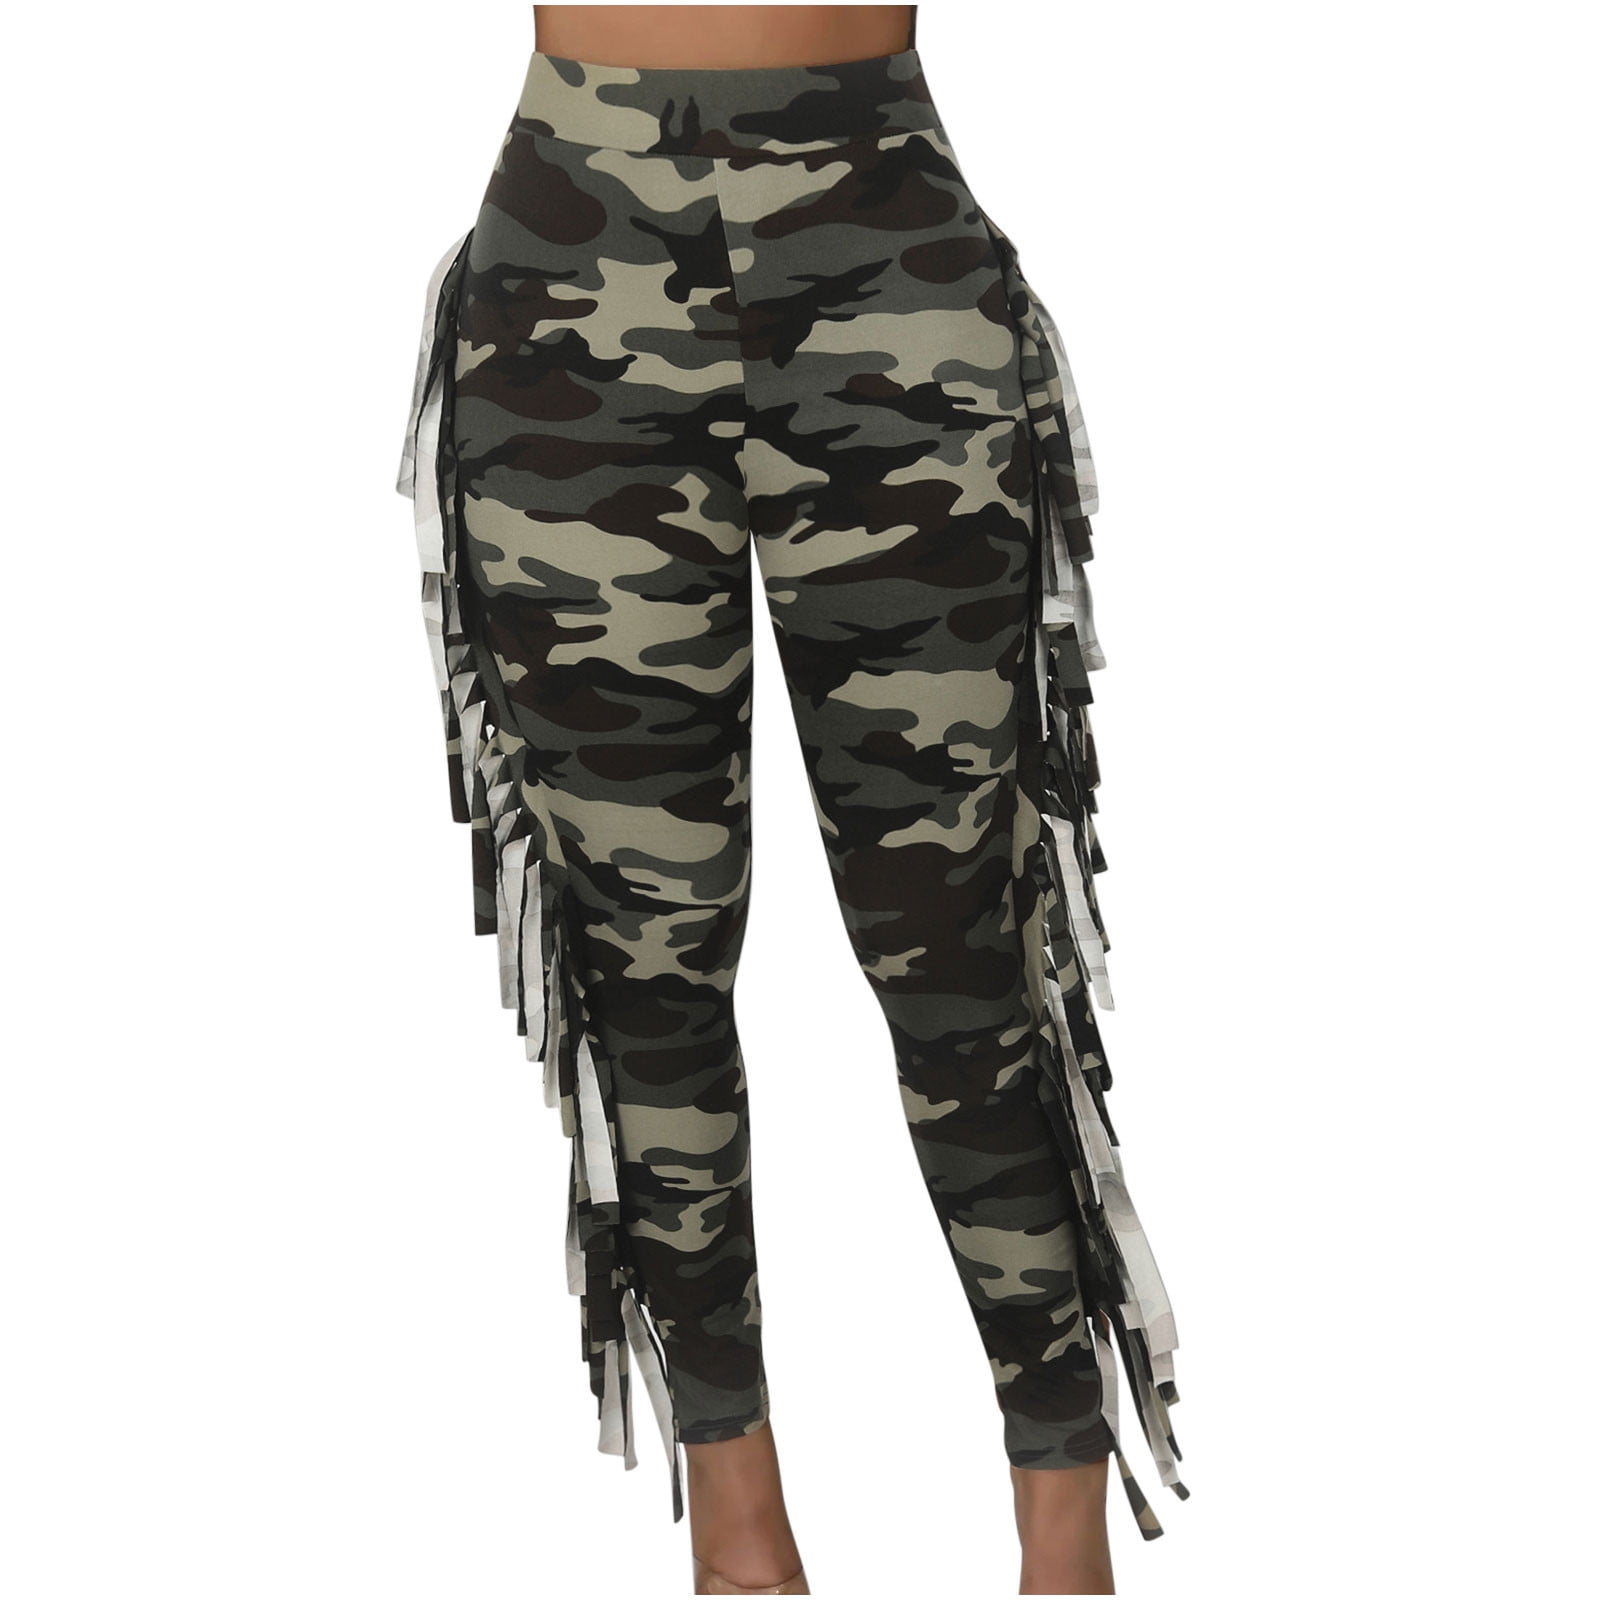 RQYYD Clearance Women Camouflage Fringe Pants High Waist